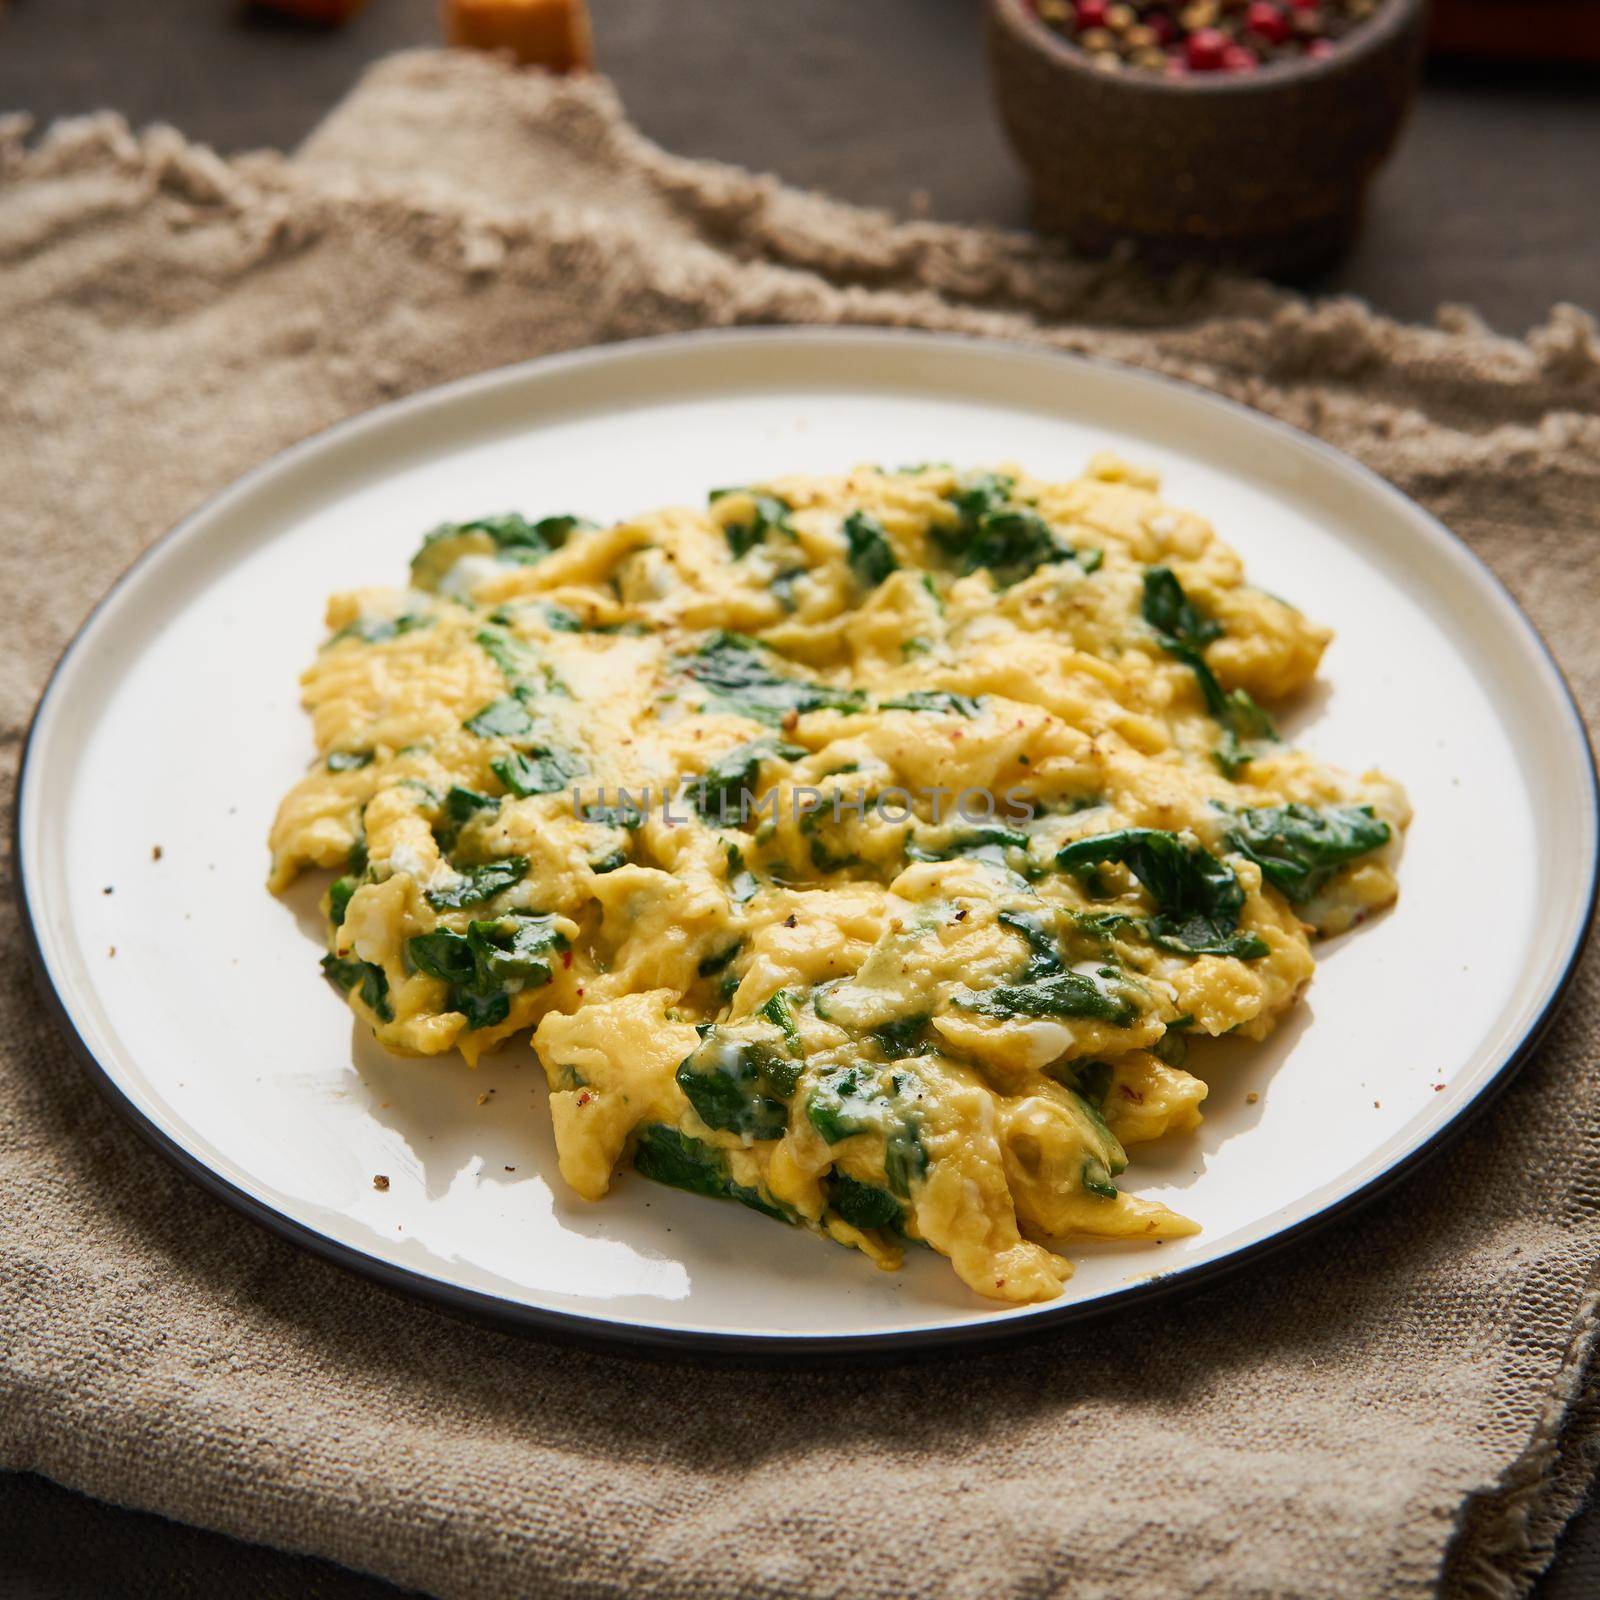 Scrambled eggs with spinach, cup of tea on dark brown background. Breakfast with Pan-fried omelette, side view